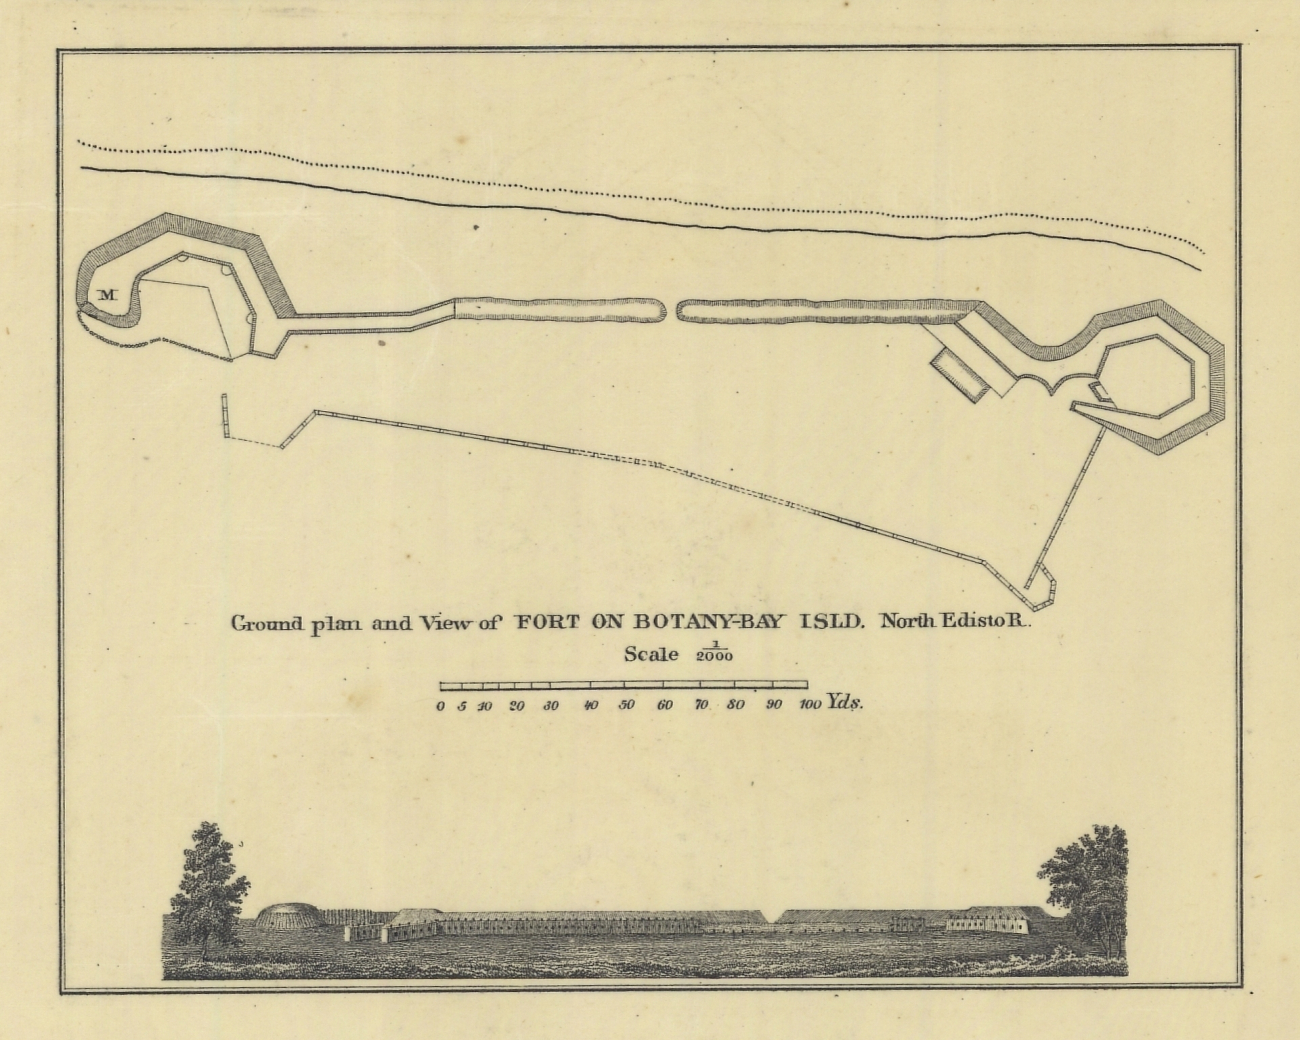 Smoother version blowup ground plan and view of Fort on Botany - Bay Island,North Edison River from cgs05212